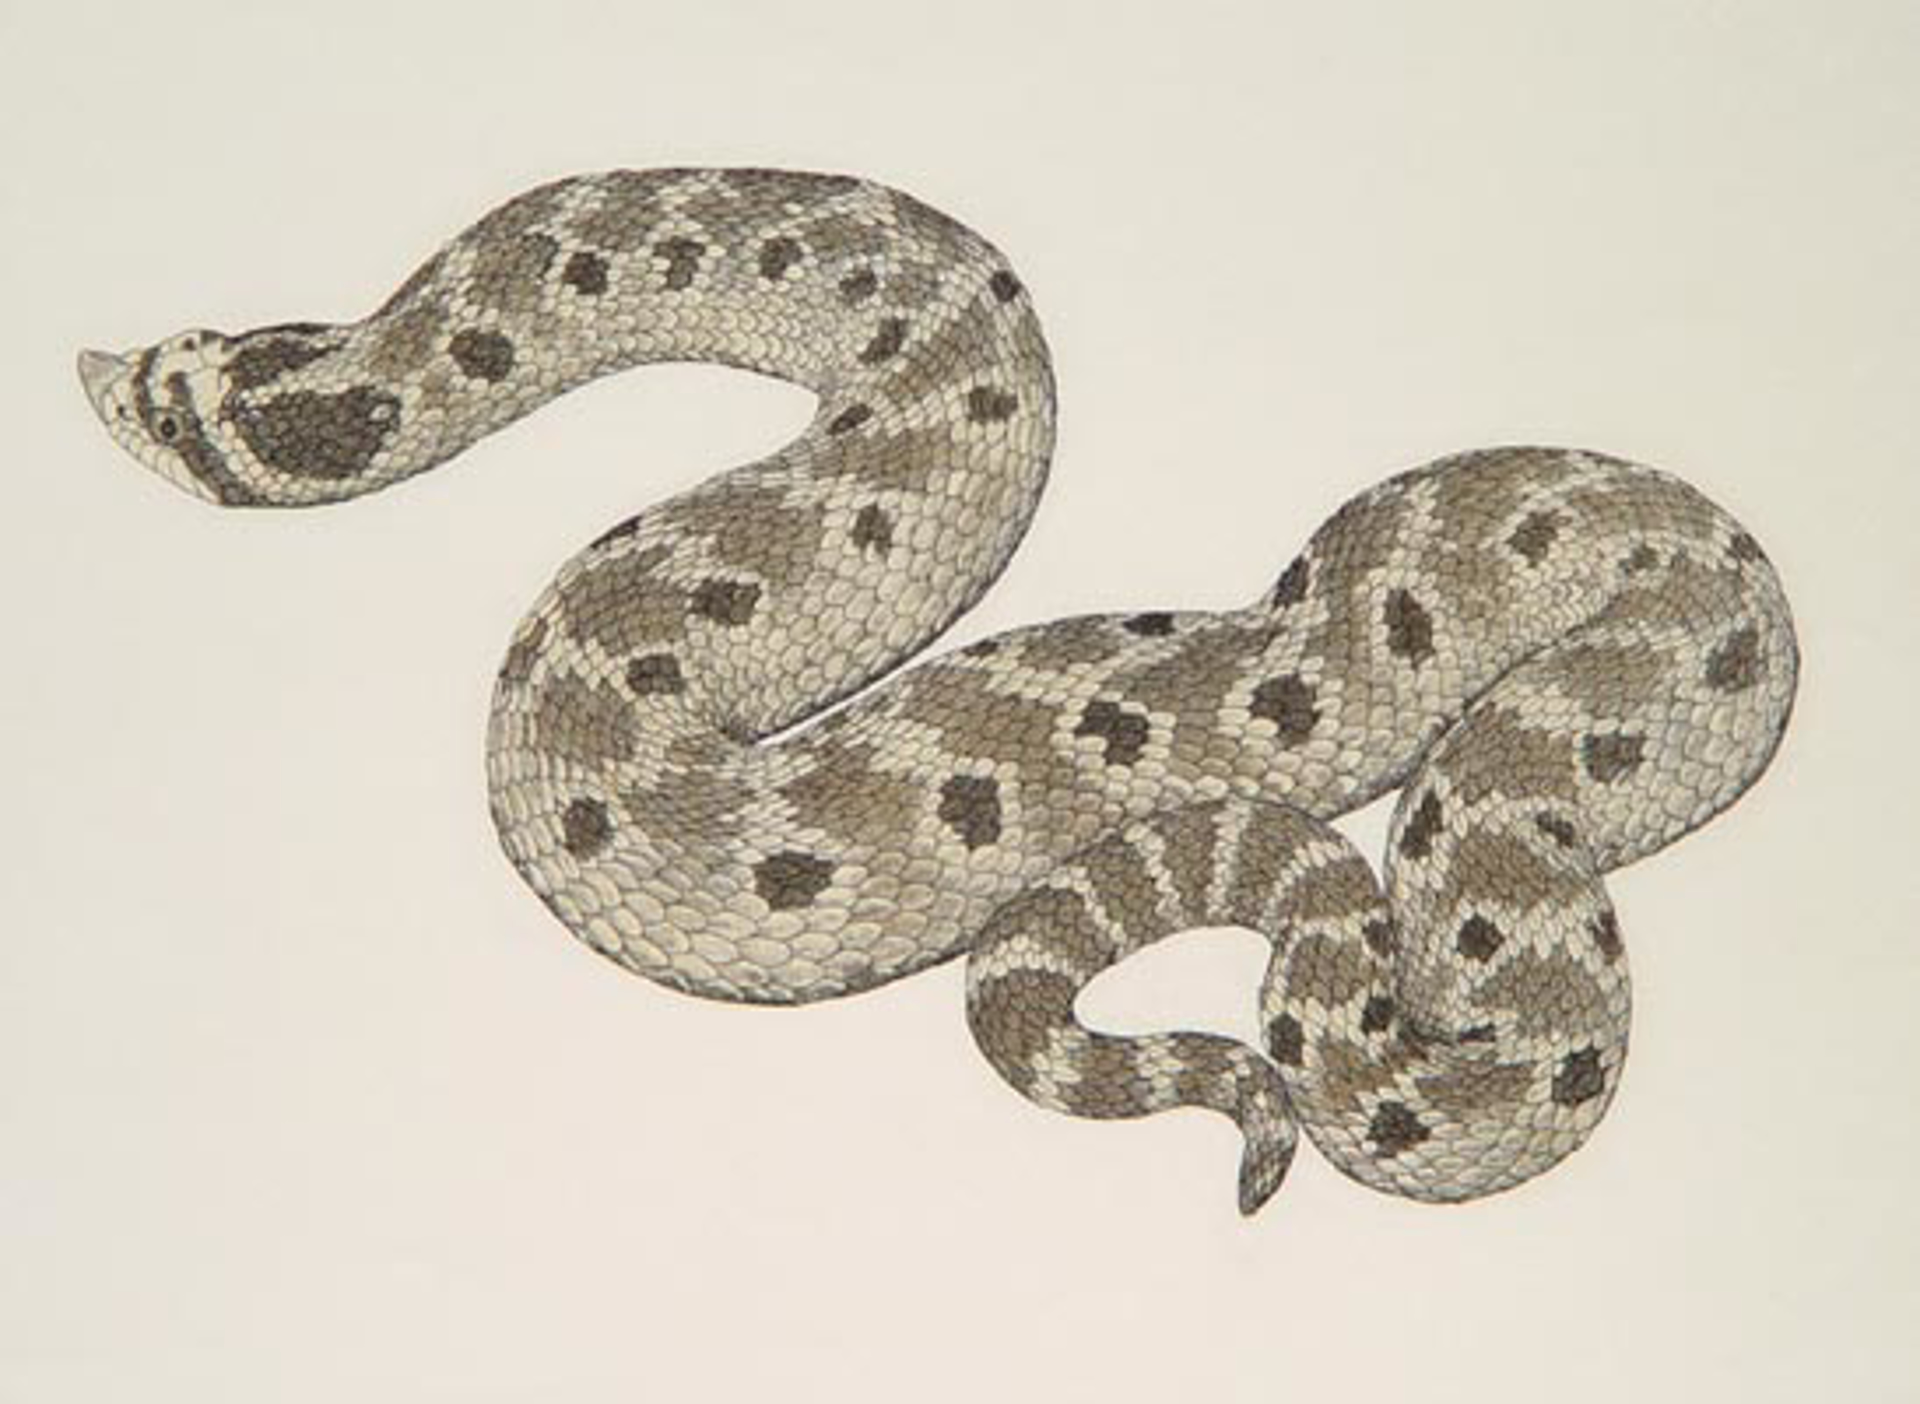 Mexican Hognose Snake by William Montgomery